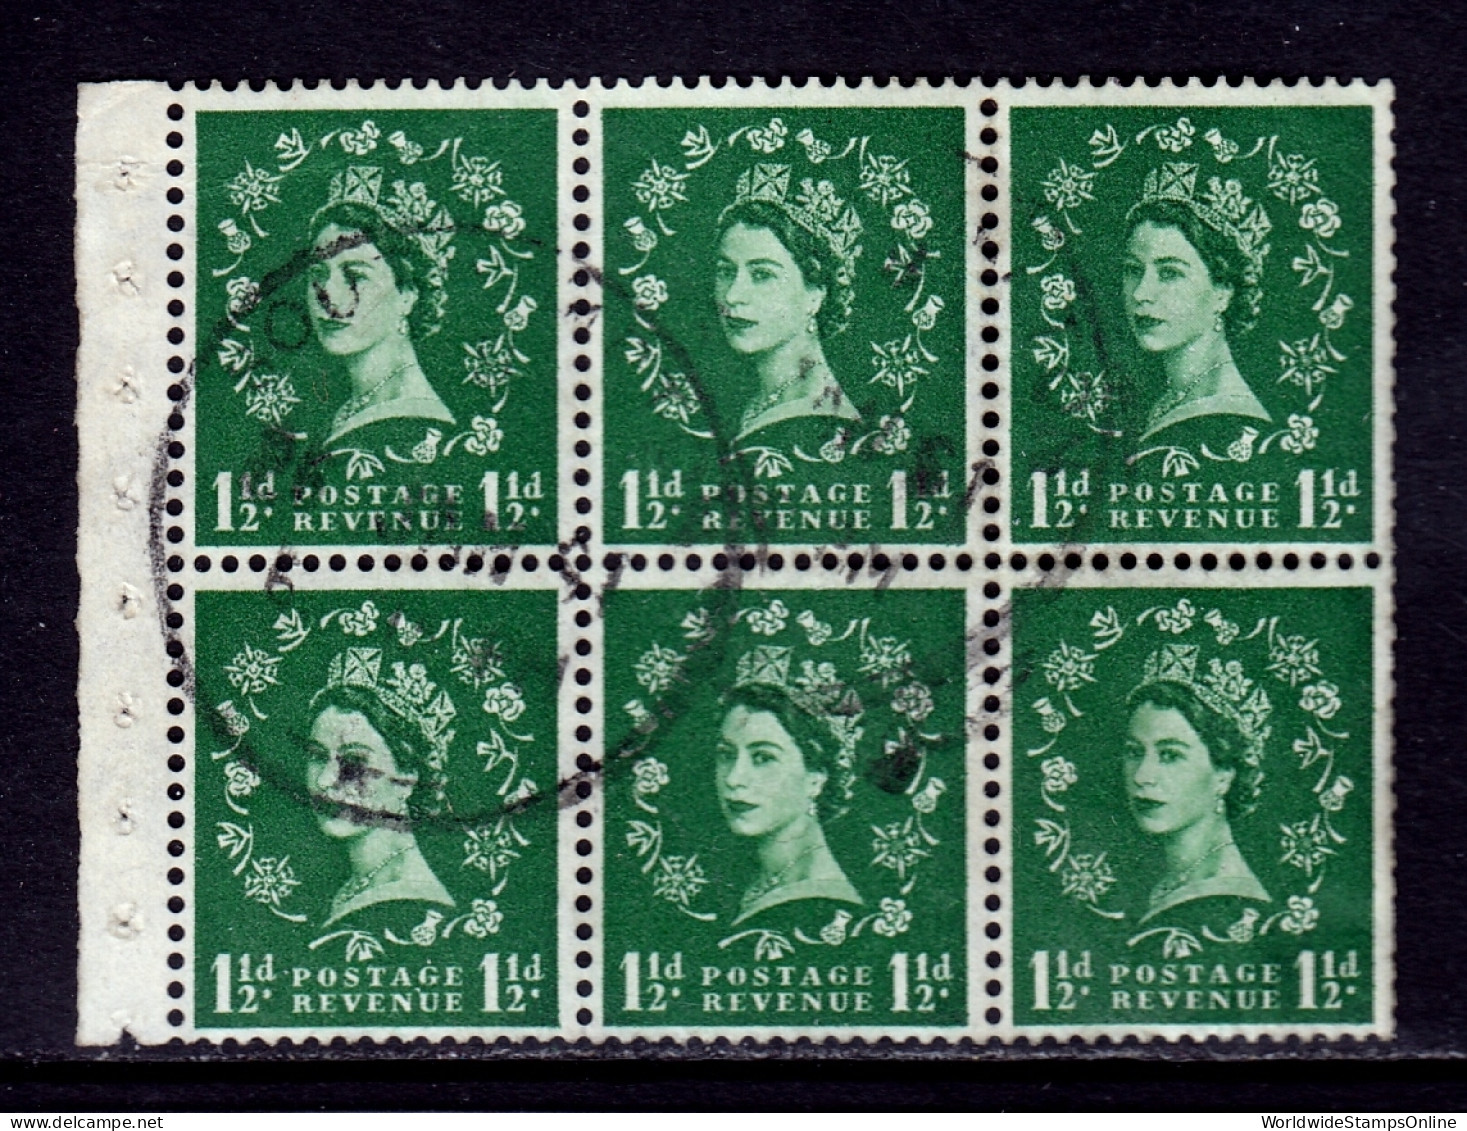 Great Britain - SG #572Wi - Used - Inverted Wmk., Full Booklet Pane - SG £7.50+ - Usati